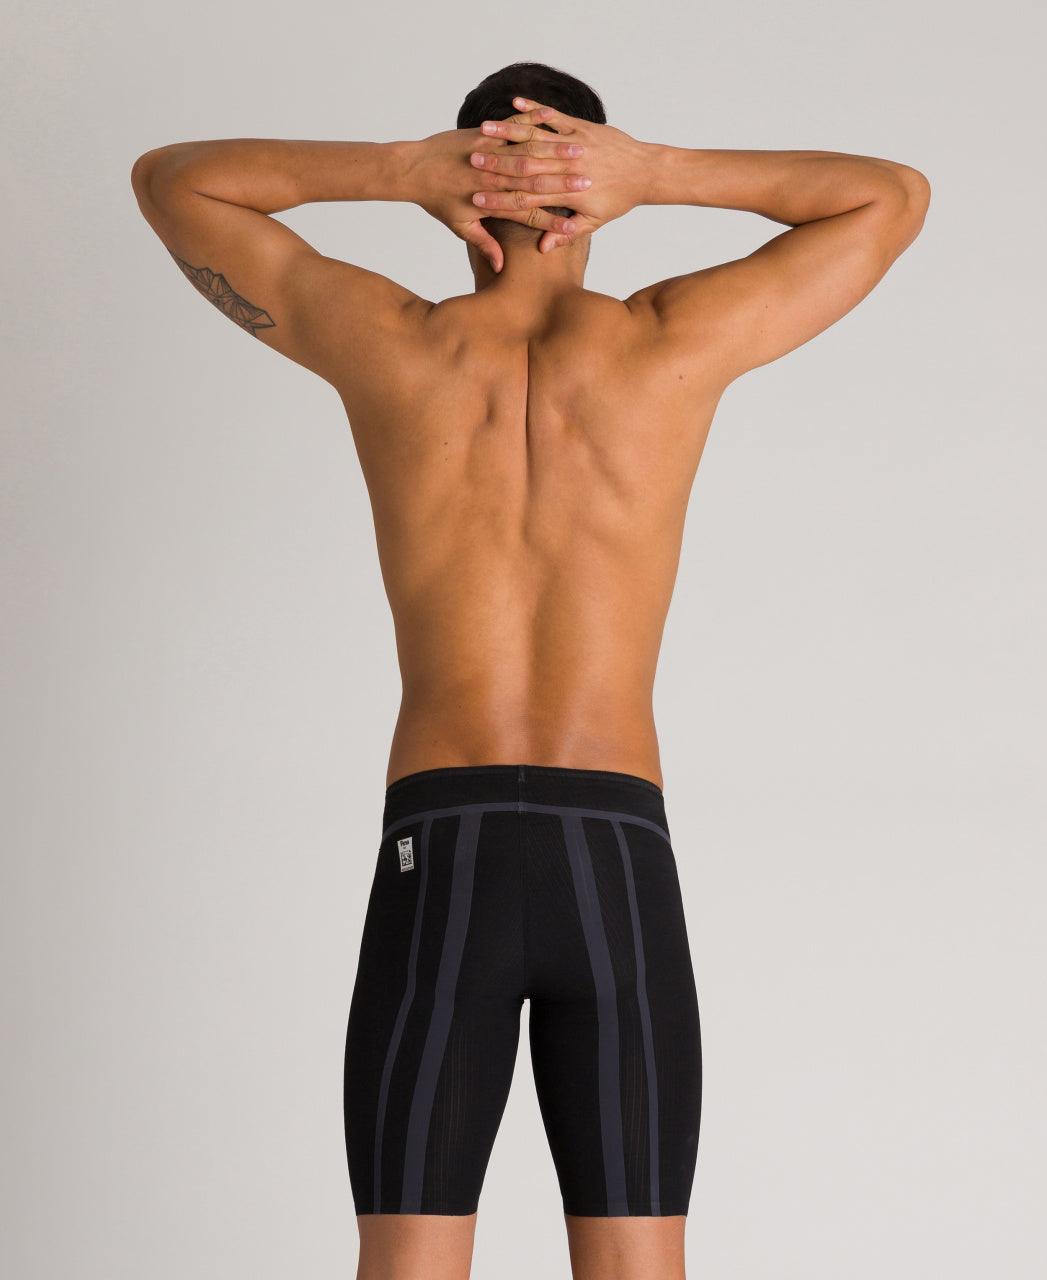 Men's Powerskin carbon core fx jammer - Fina Approved - {{ collection.title }} - TIT